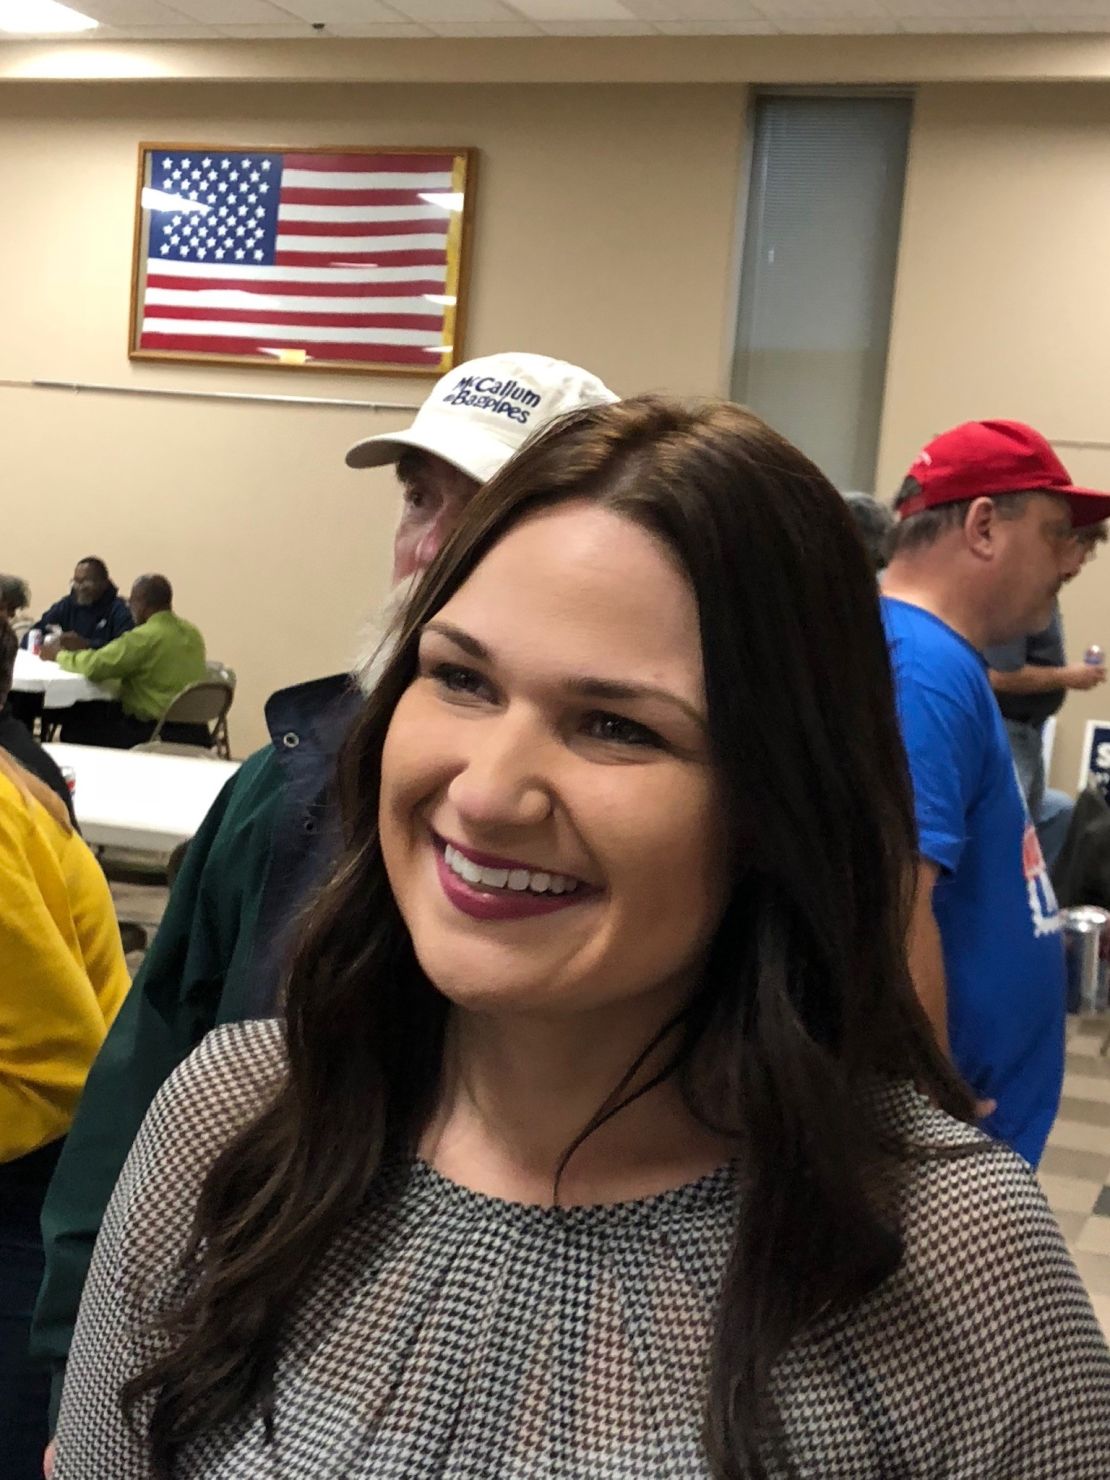 Candidate Abby Finkenauer, 29, is younger than many of the voters, but she still has a "one of us" connection with them.